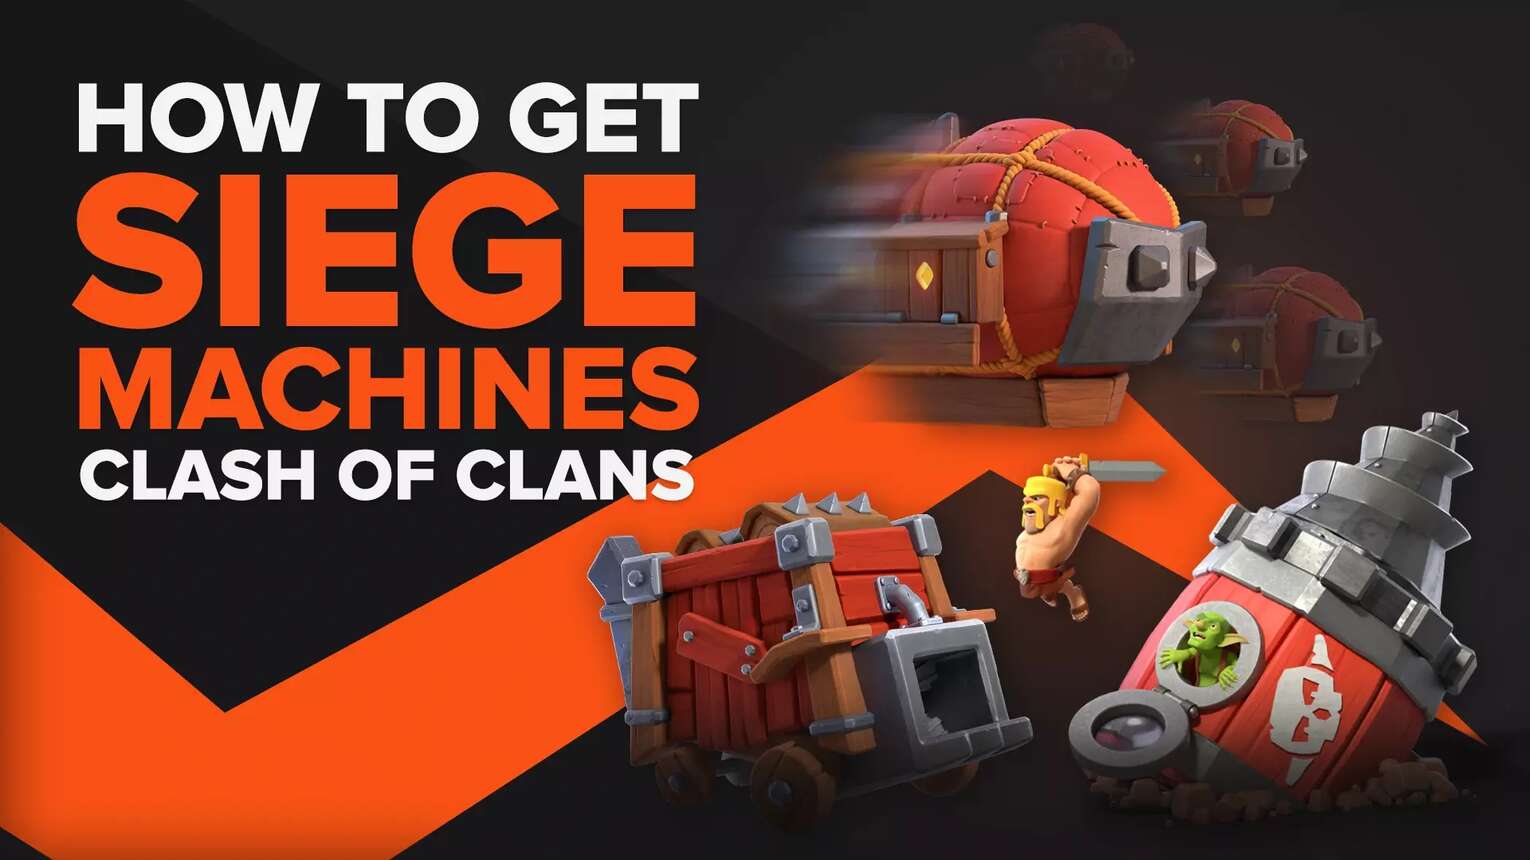 How To Get Siege Machines In Clash Of Clans [All Methods]